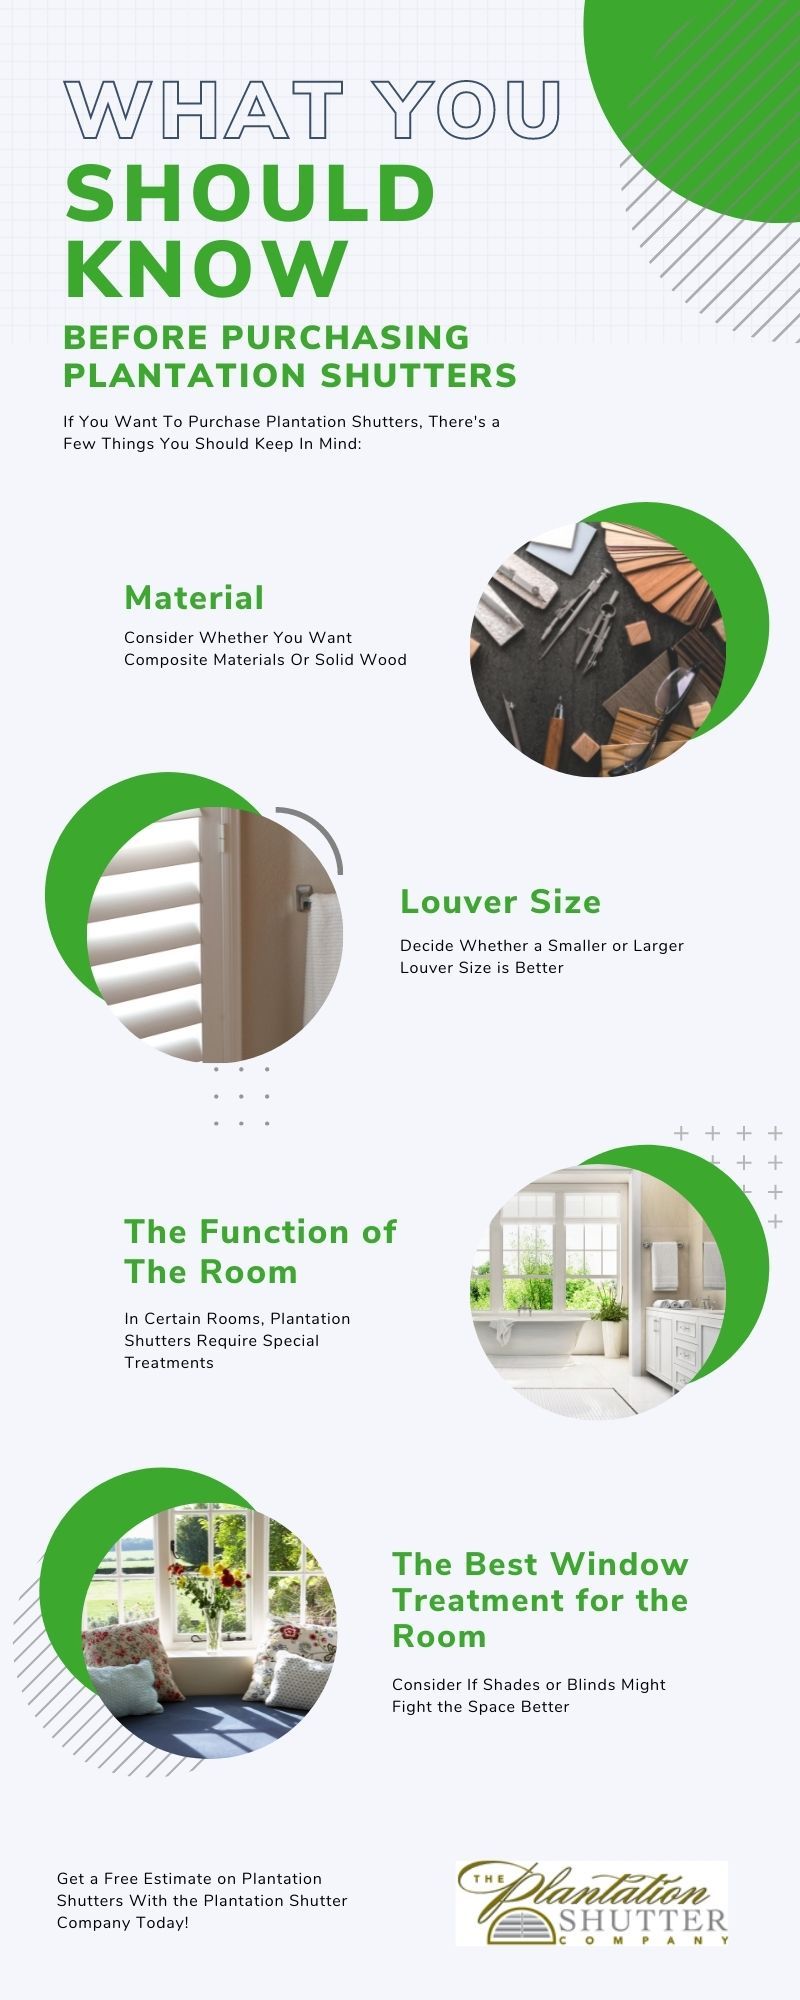 M28556 - what to know before buying plantation shutters infographic (1).jpg